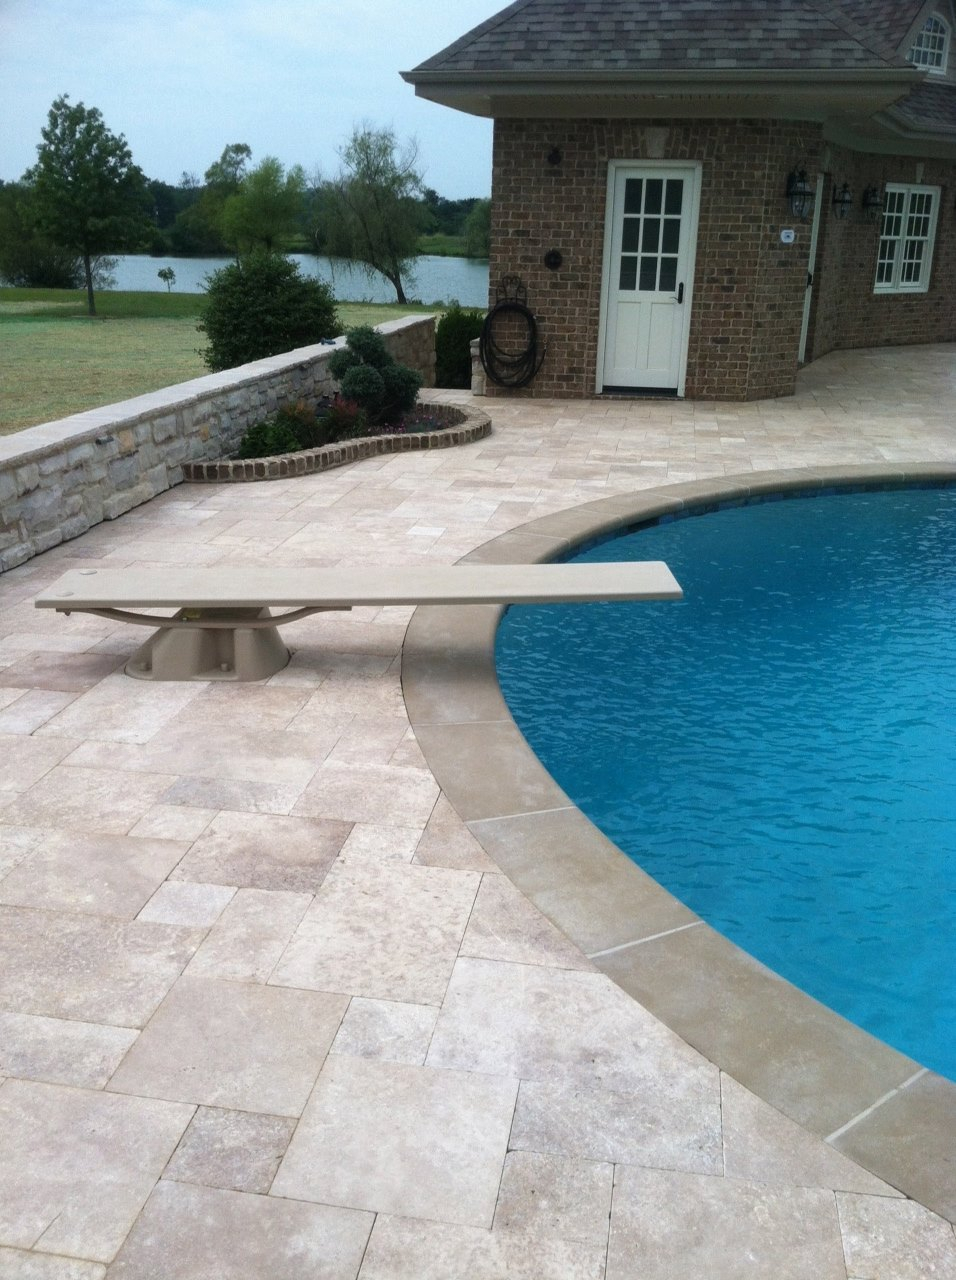 Travertine Pool Decks Are Travertine Pavers Ok For Pools Two within dimensions 956 X 1280